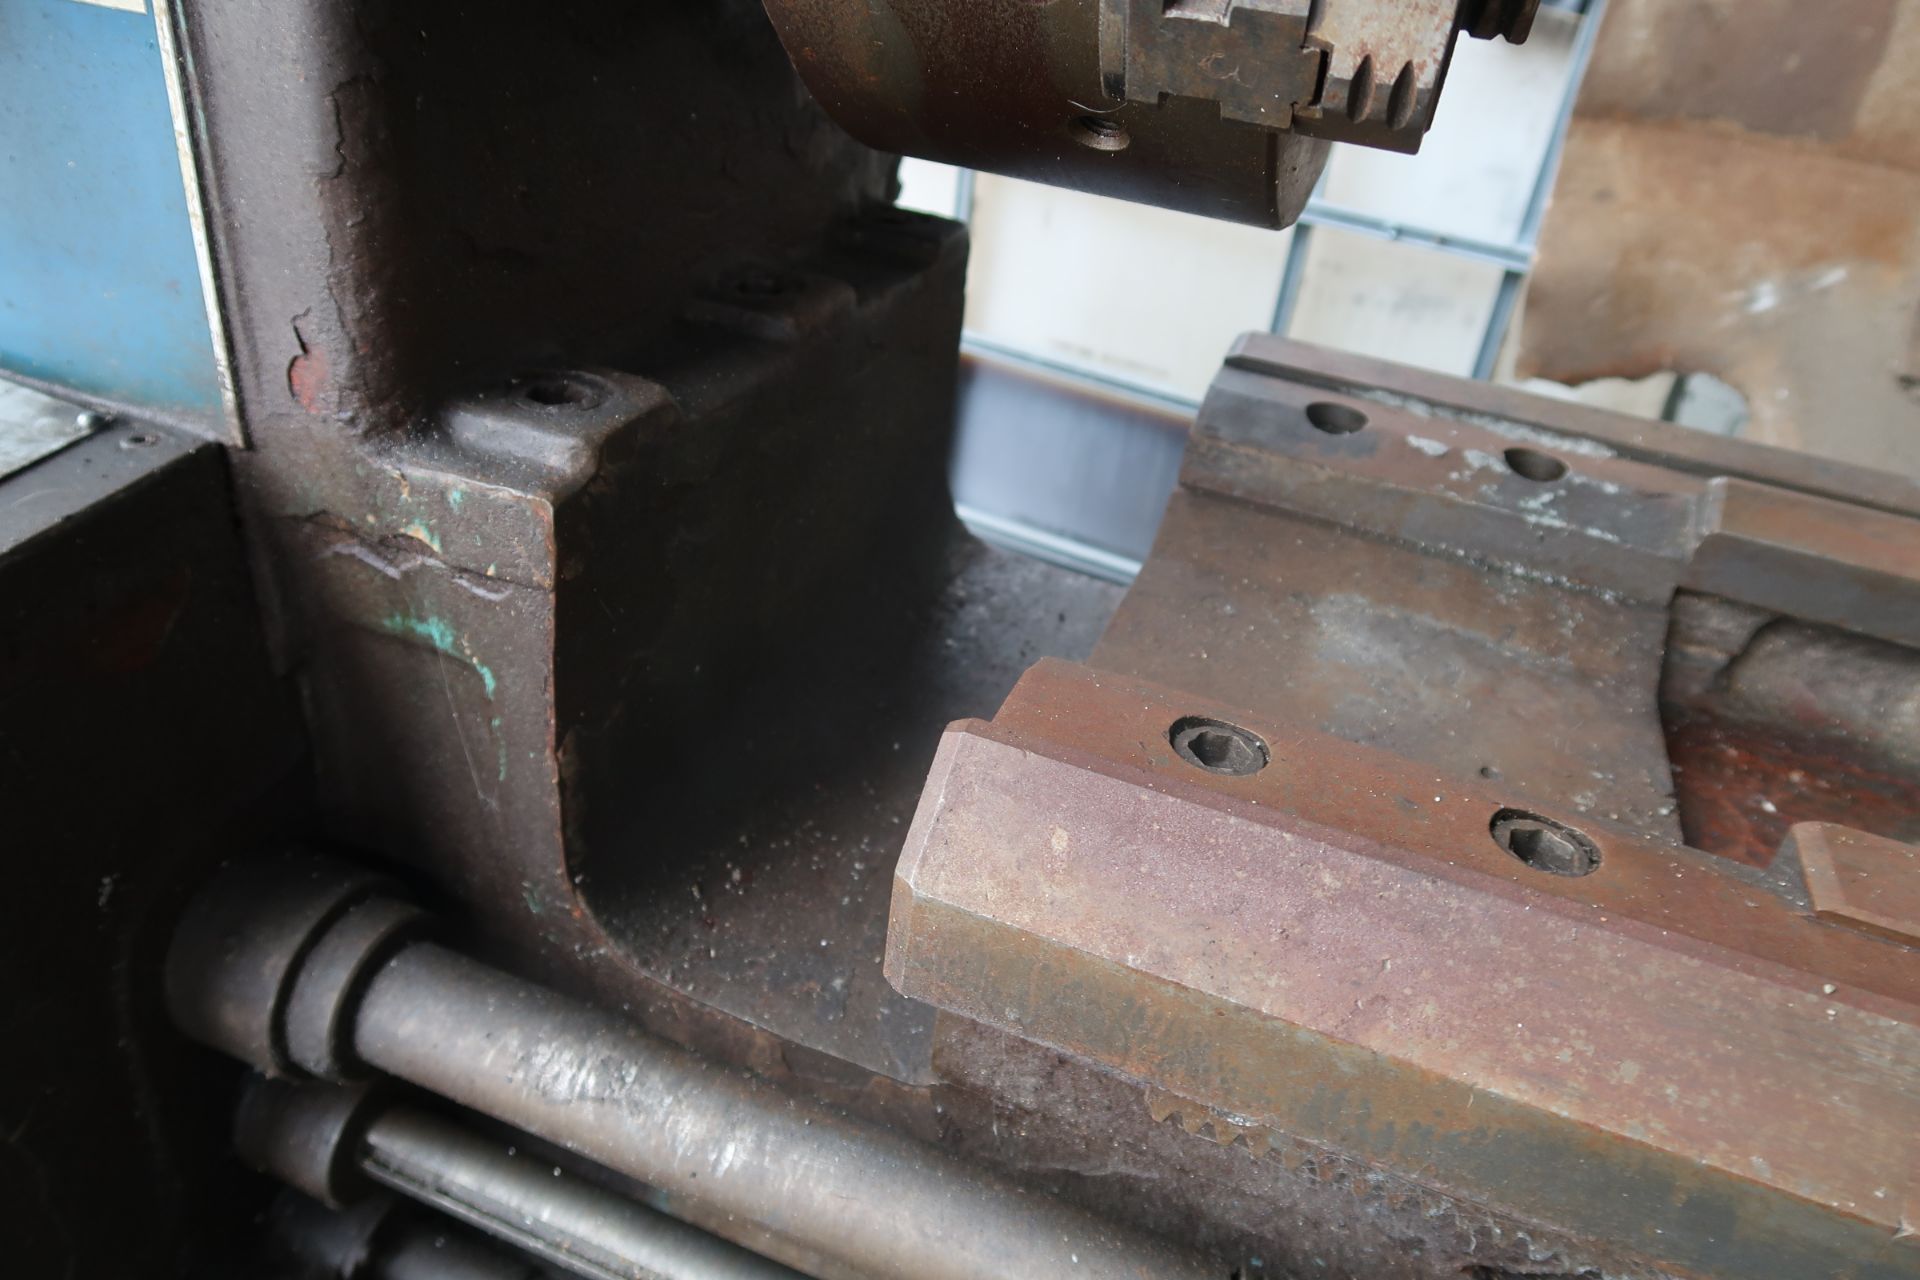 Gap Lathe 12.5" 3Jaw Chuck, Tail Stock Mod. DLA520 (SOLD AS-IS - NO WARRANTY) - Image 6 of 12